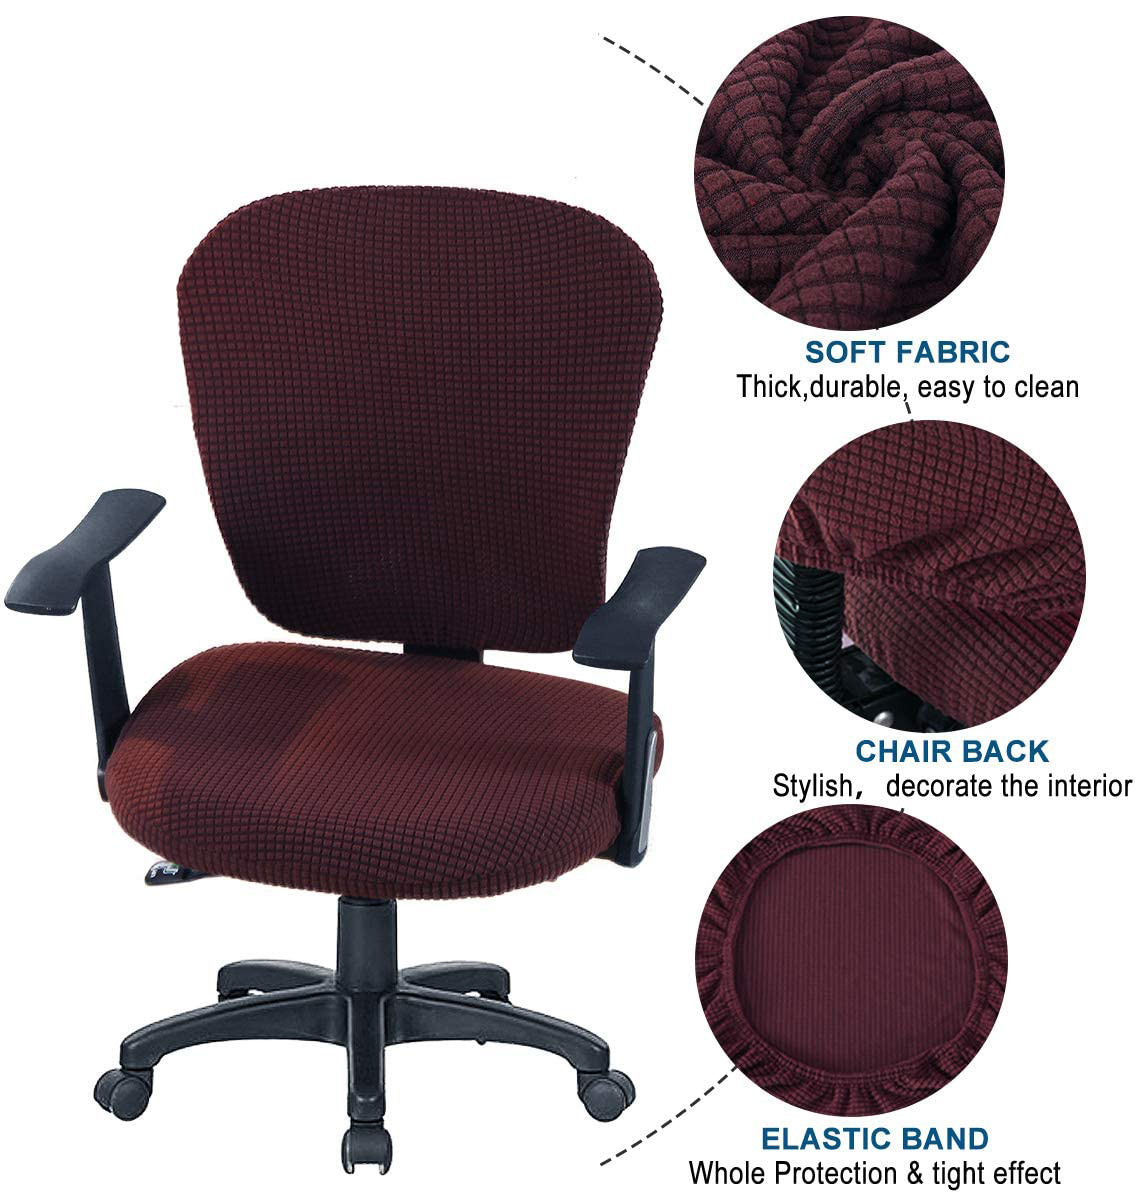 Office Chair Cover 2 Piece Stretchable Computer Office Chair Covers Universal Chair Seat Covers Stretch Rotating Chair Slipcovers Washable Spandex Desk Chair Cover Protectors - image 4 of 7